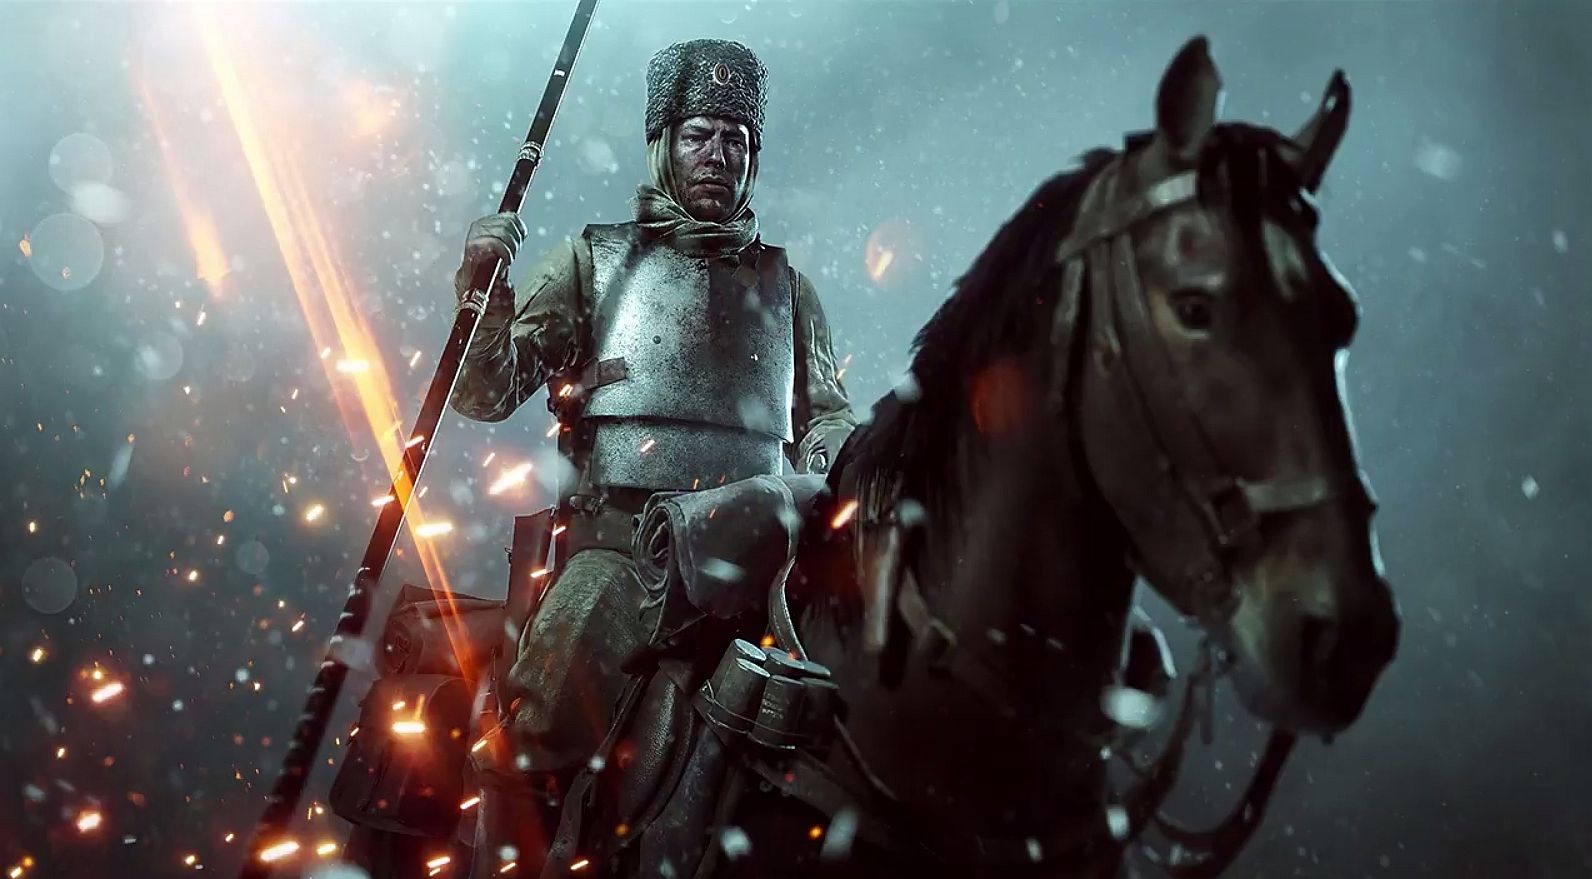 Image for Battlefield 1 In the Name of the Tsar, Battlefield 4 Final Stand free for a limited time